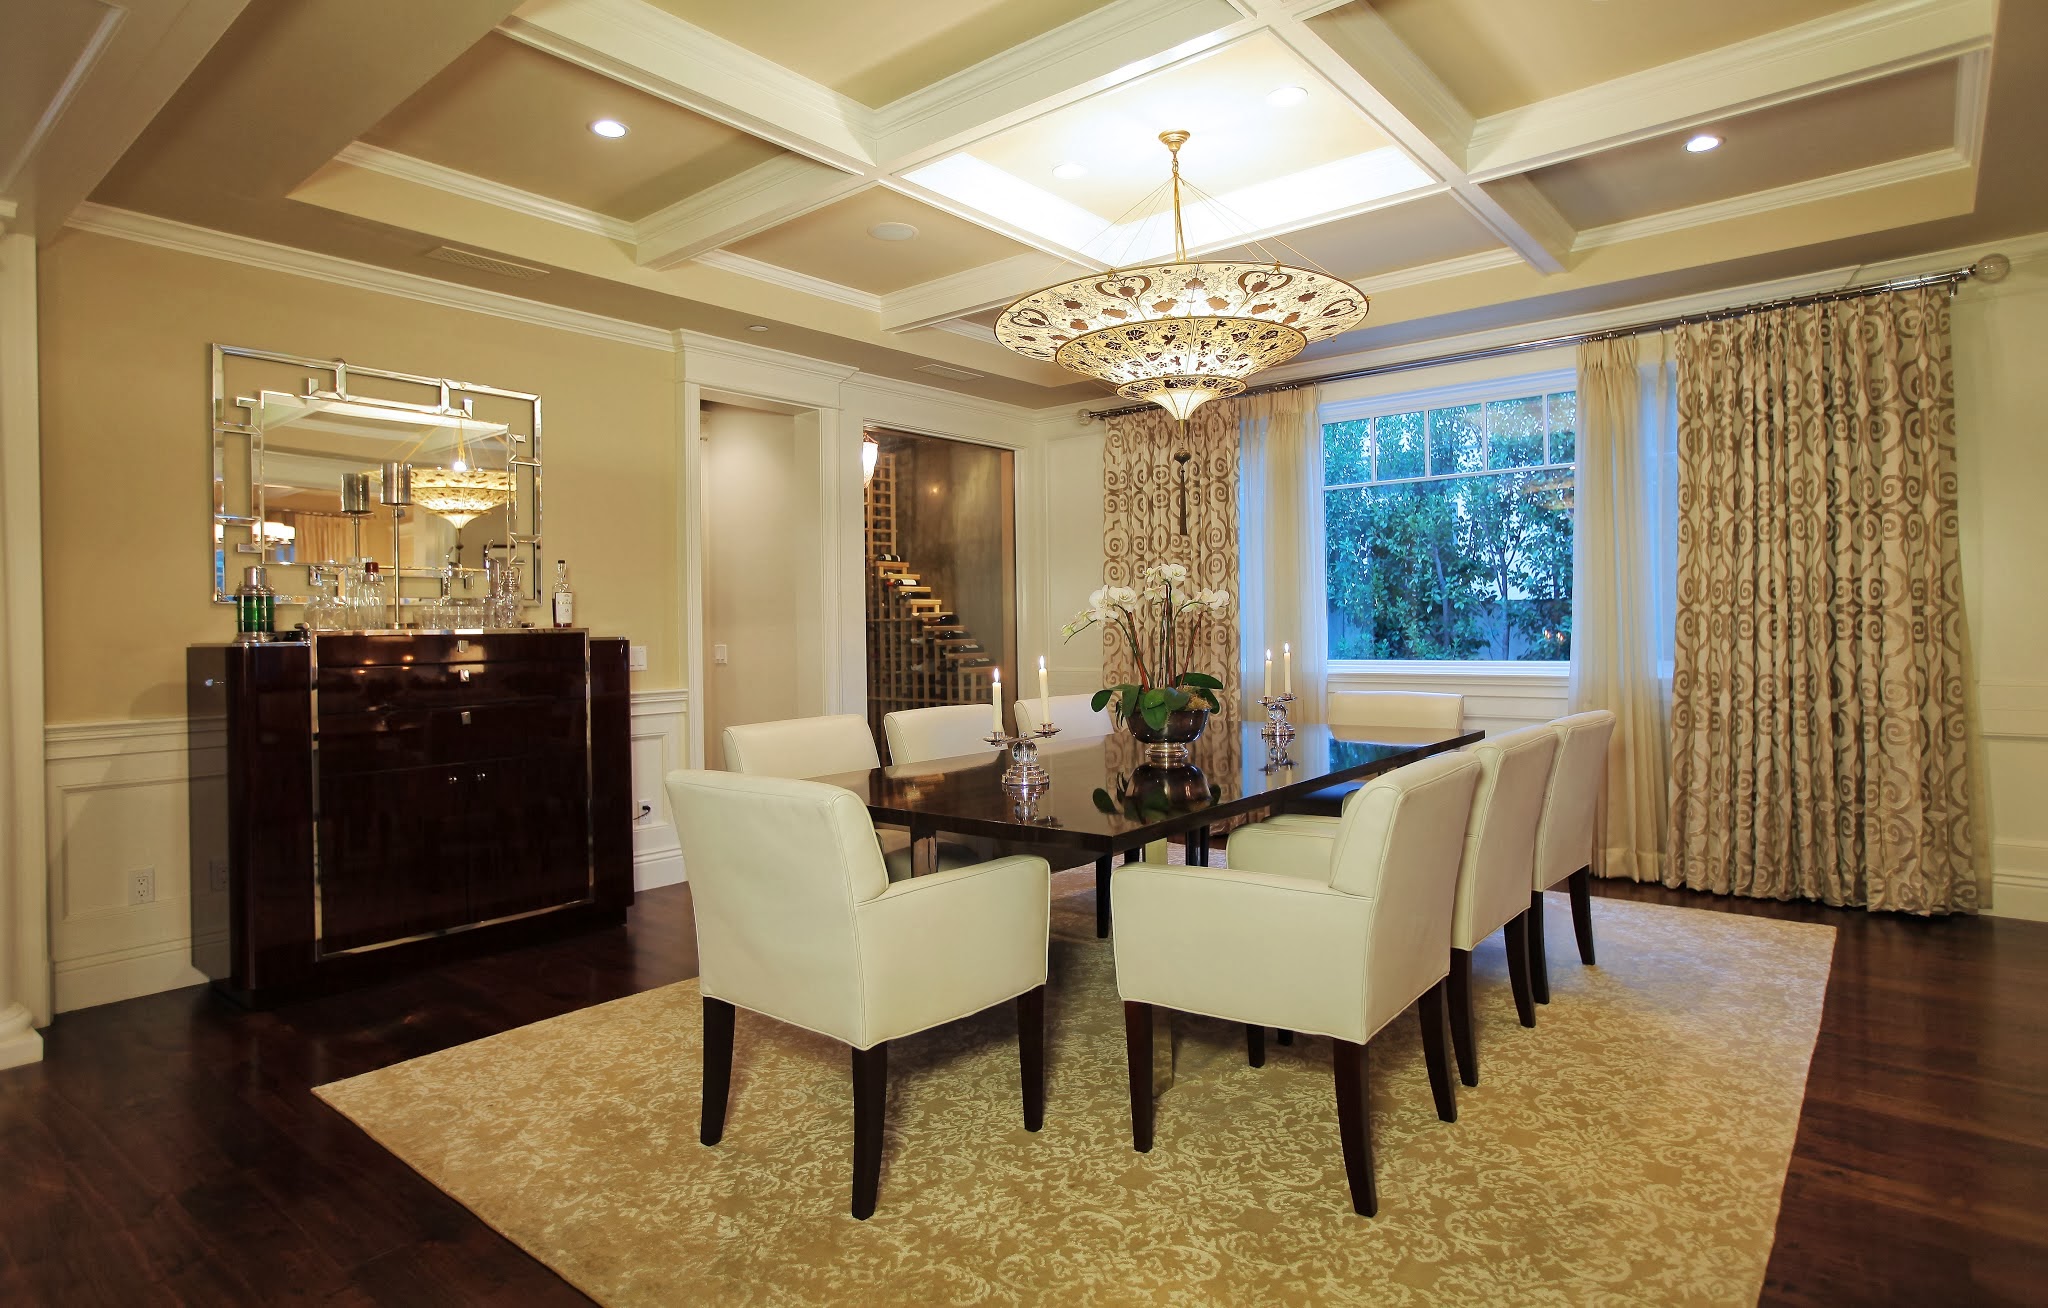 ceiling tiles for dining room